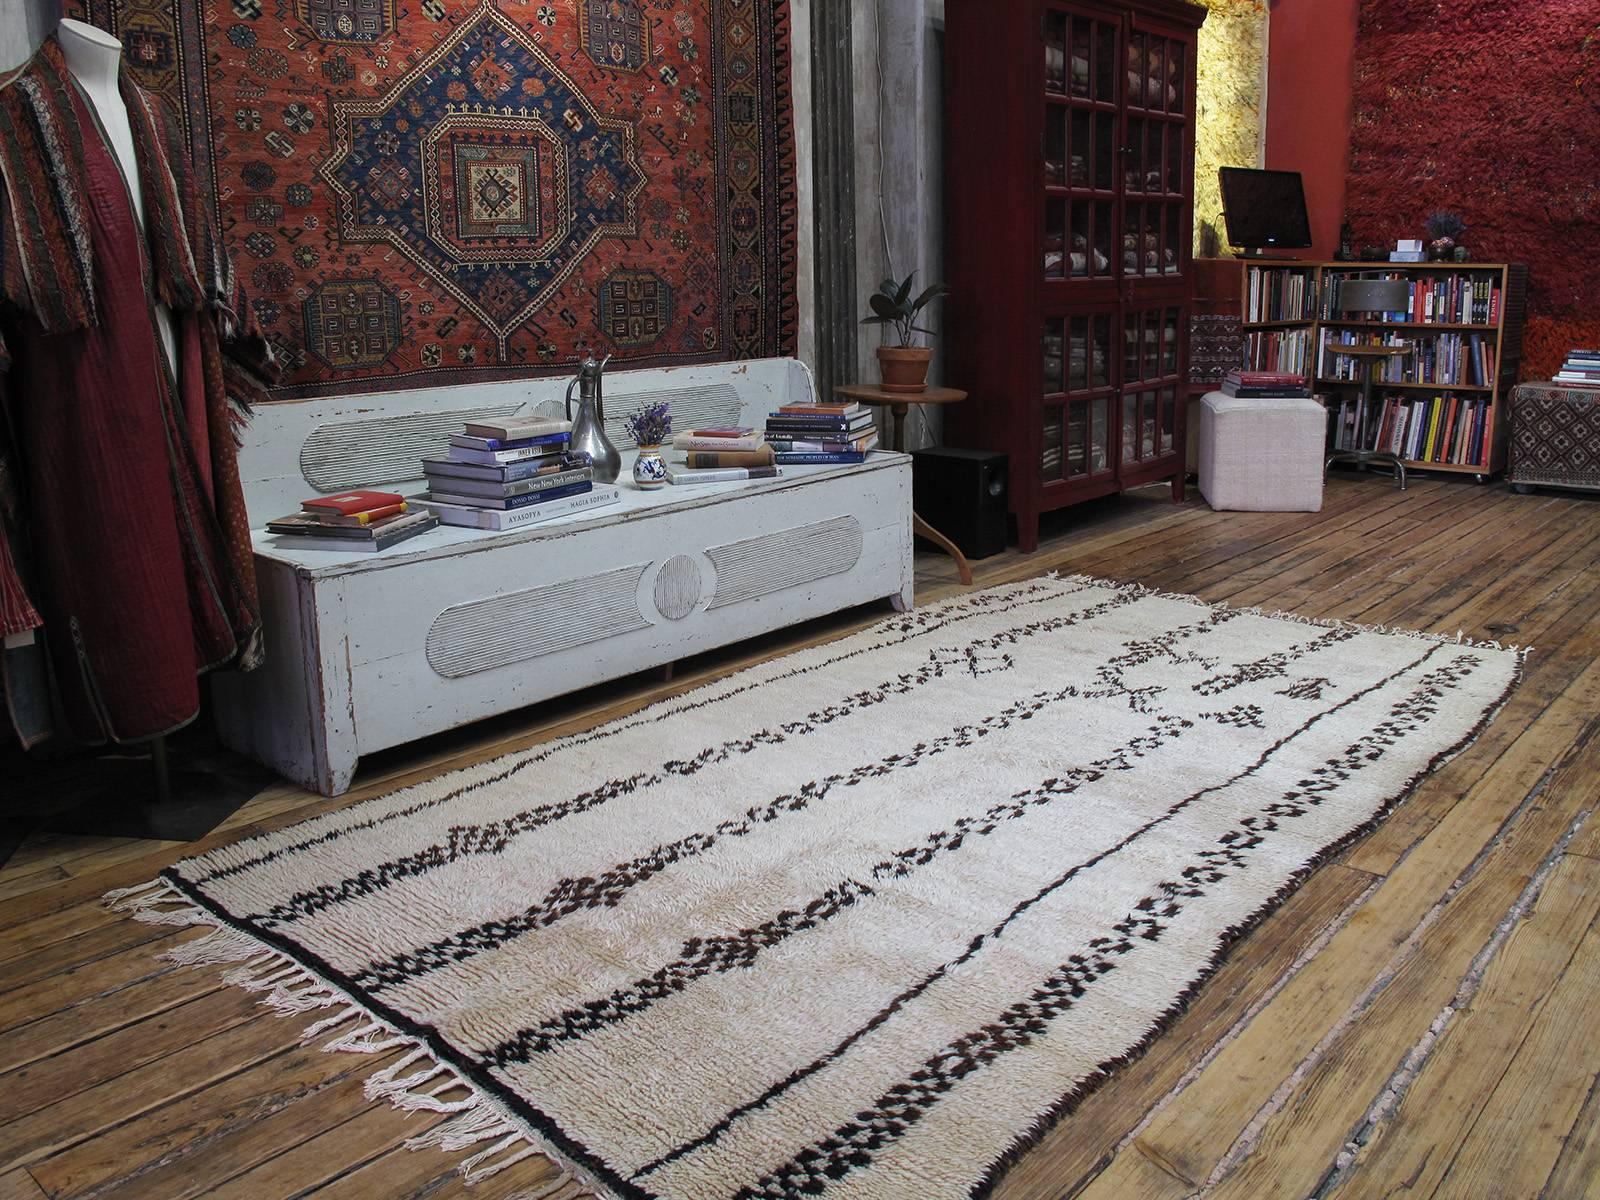 Exceptional Azilal Berber Moroccan rug. An old Moroccan Berber rug from the Azilal province in the Central High Atlas Mountains. Generous proportions and high density weave for this type of rug.

This part of Morocco remains a prolific center of